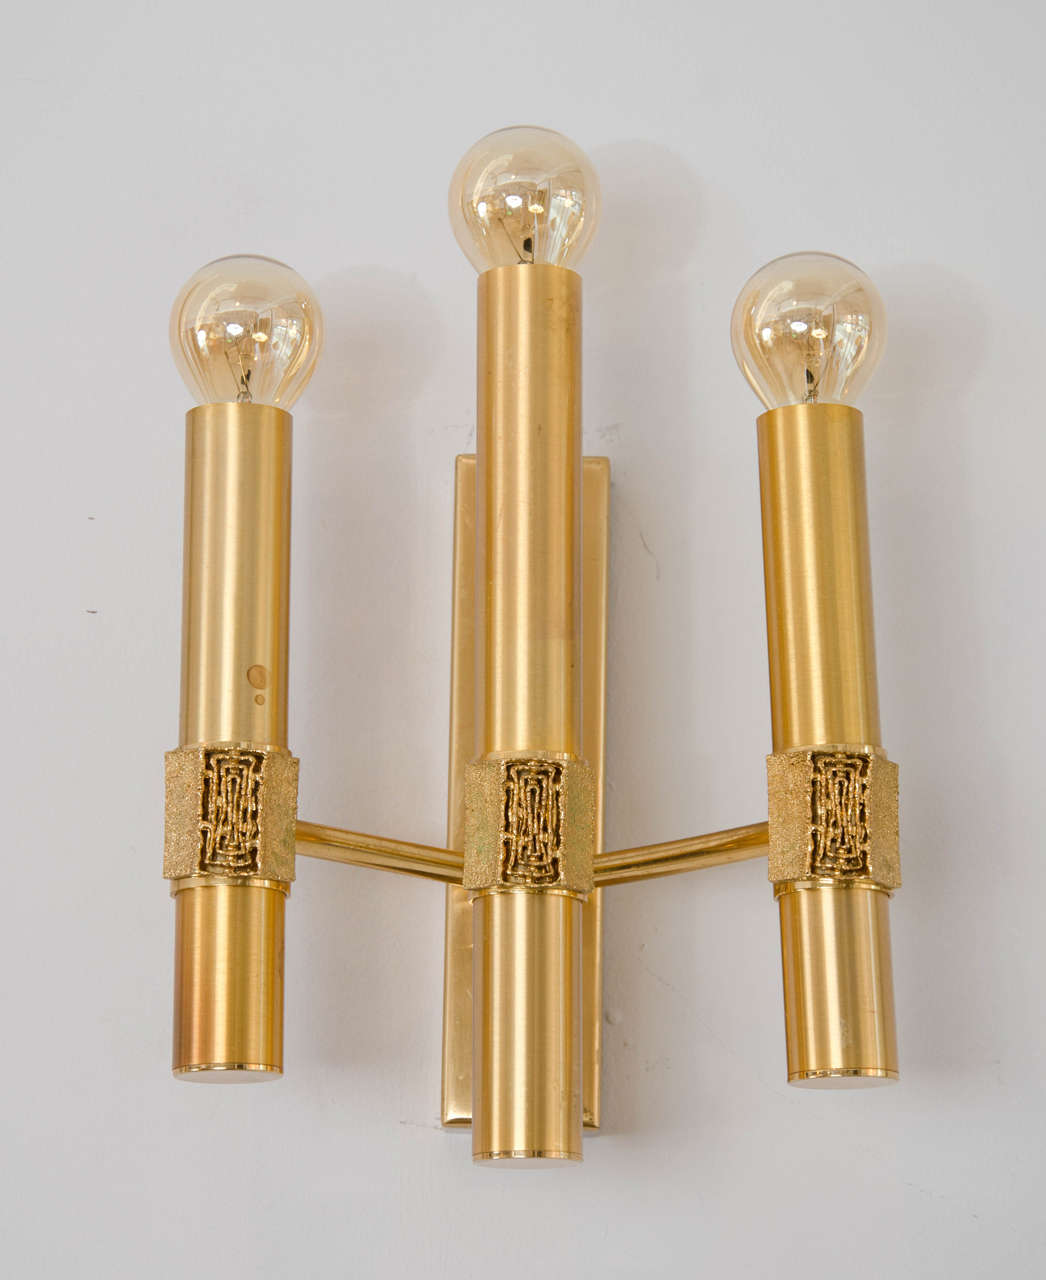 Pair of Brass Wall Sconces by of Angelo Brotto for Esperia, 1970s In Excellent Condition For Sale In London, GB